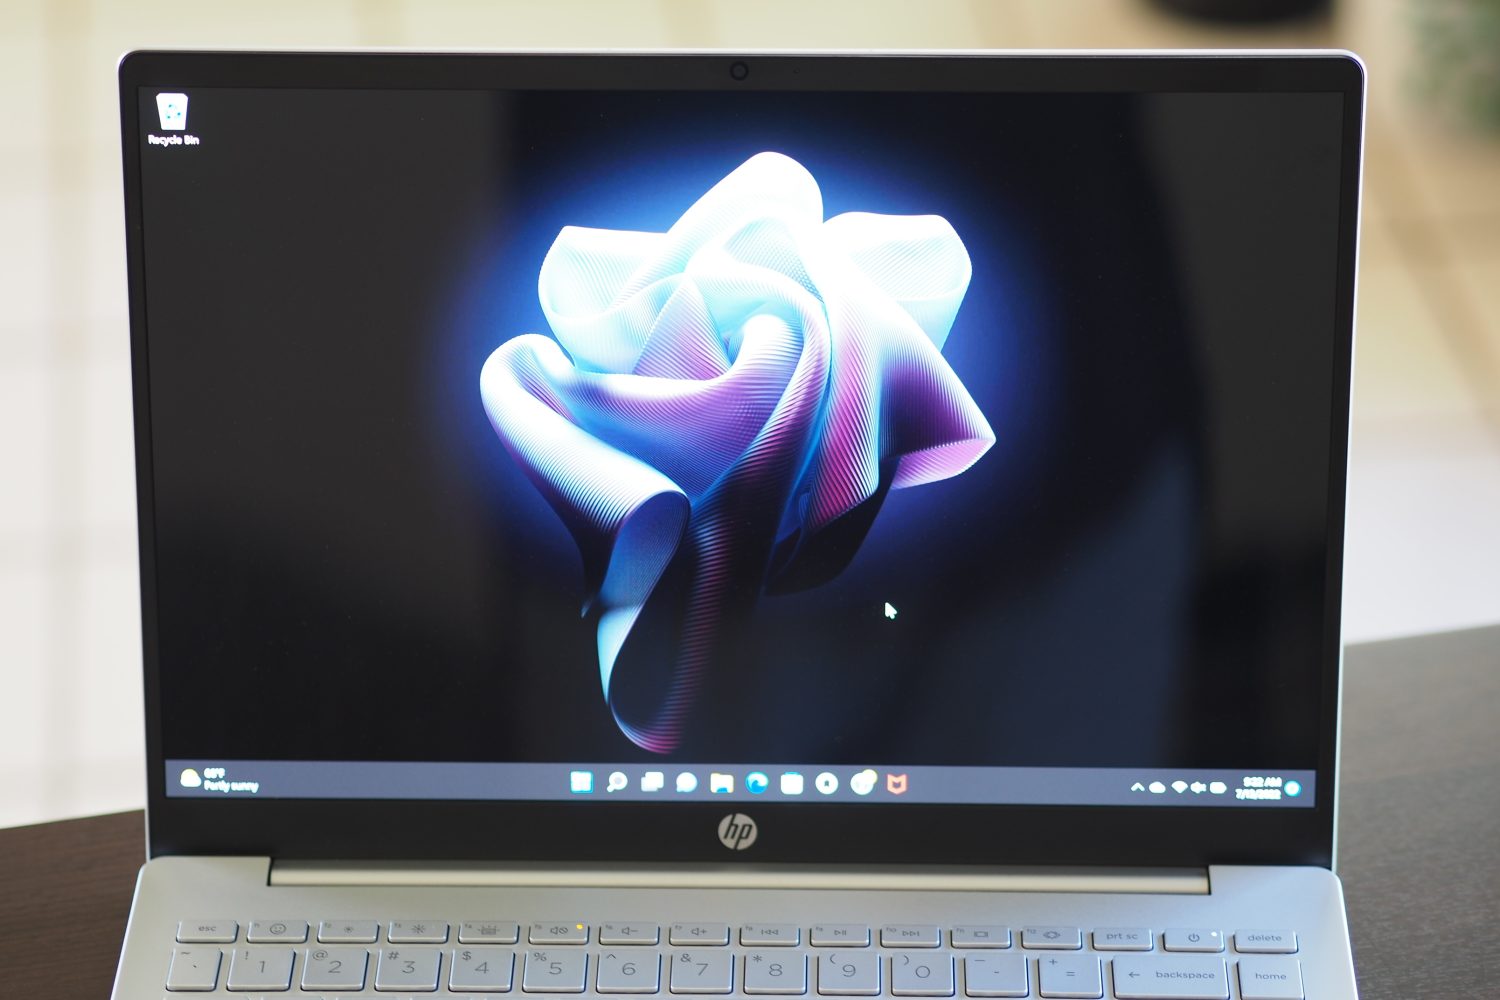 HP Pavilion Plus 14 coming with 12th gen Core i7-12700H and GeForce RTX  2050 graphics to be faster than many other 14-inch laptops -   News